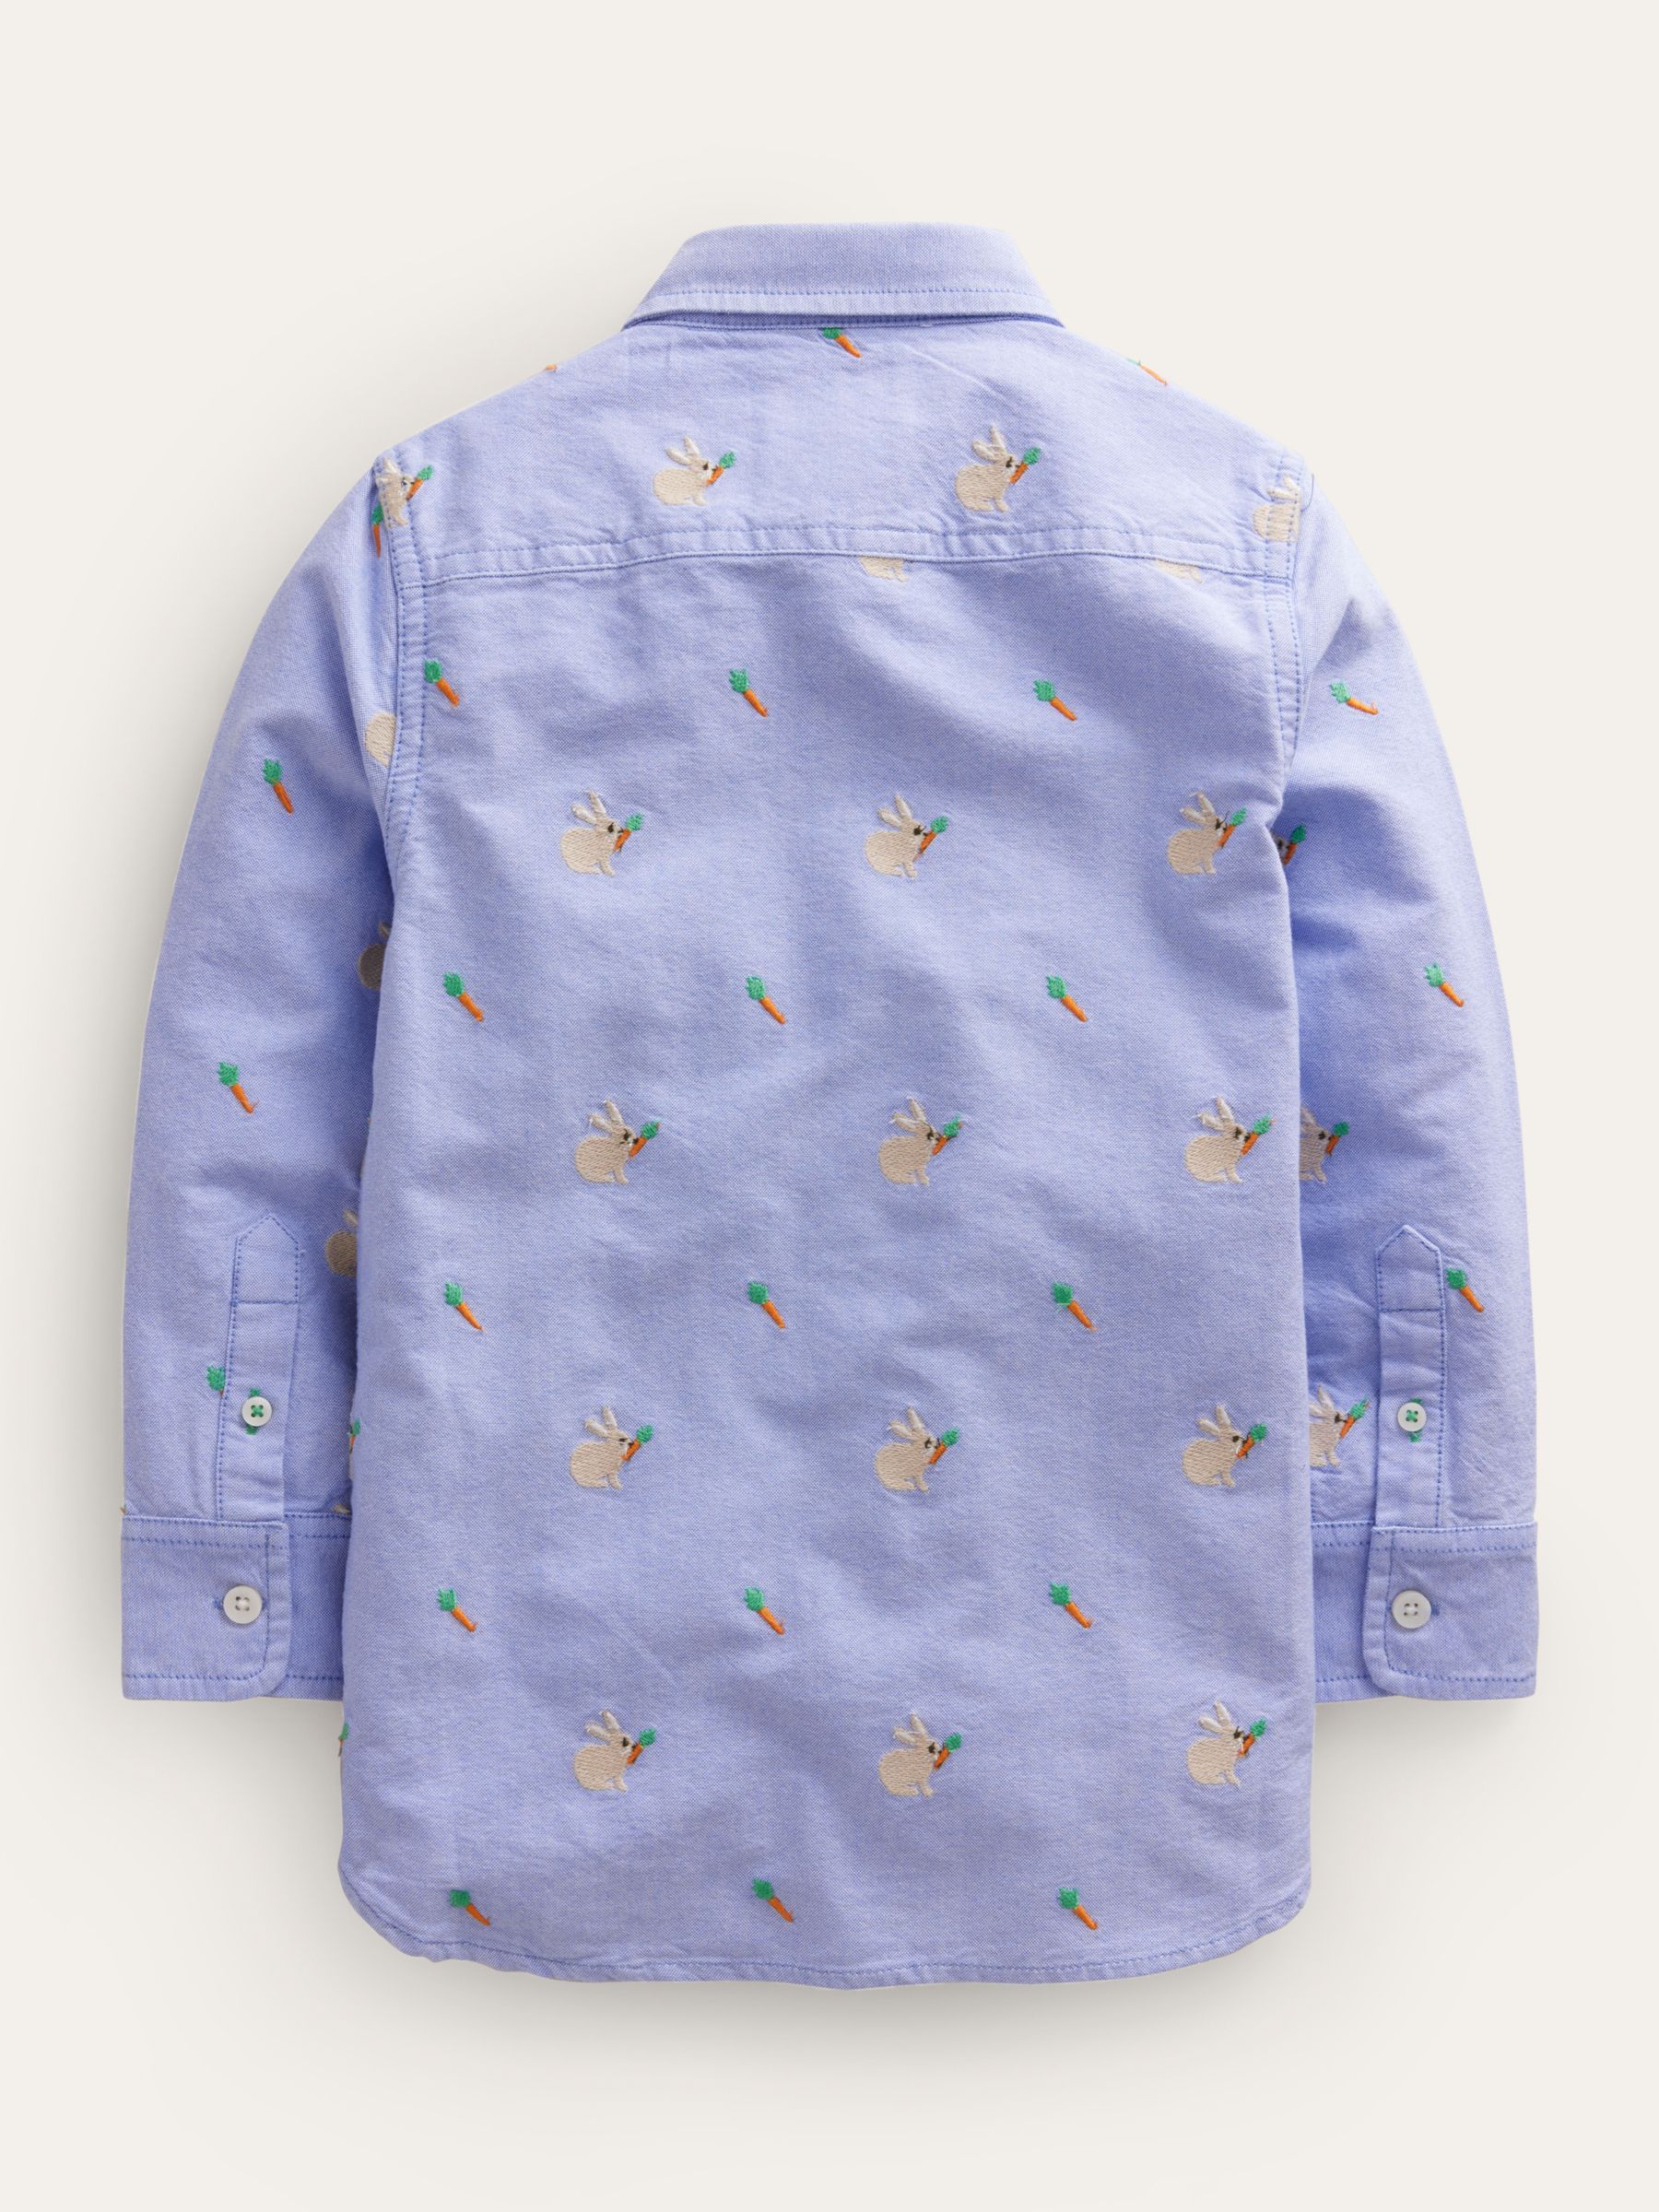 Mini Boden Kids' Embroidered Bunny Oxford Shirt, Blue, 4-5 years